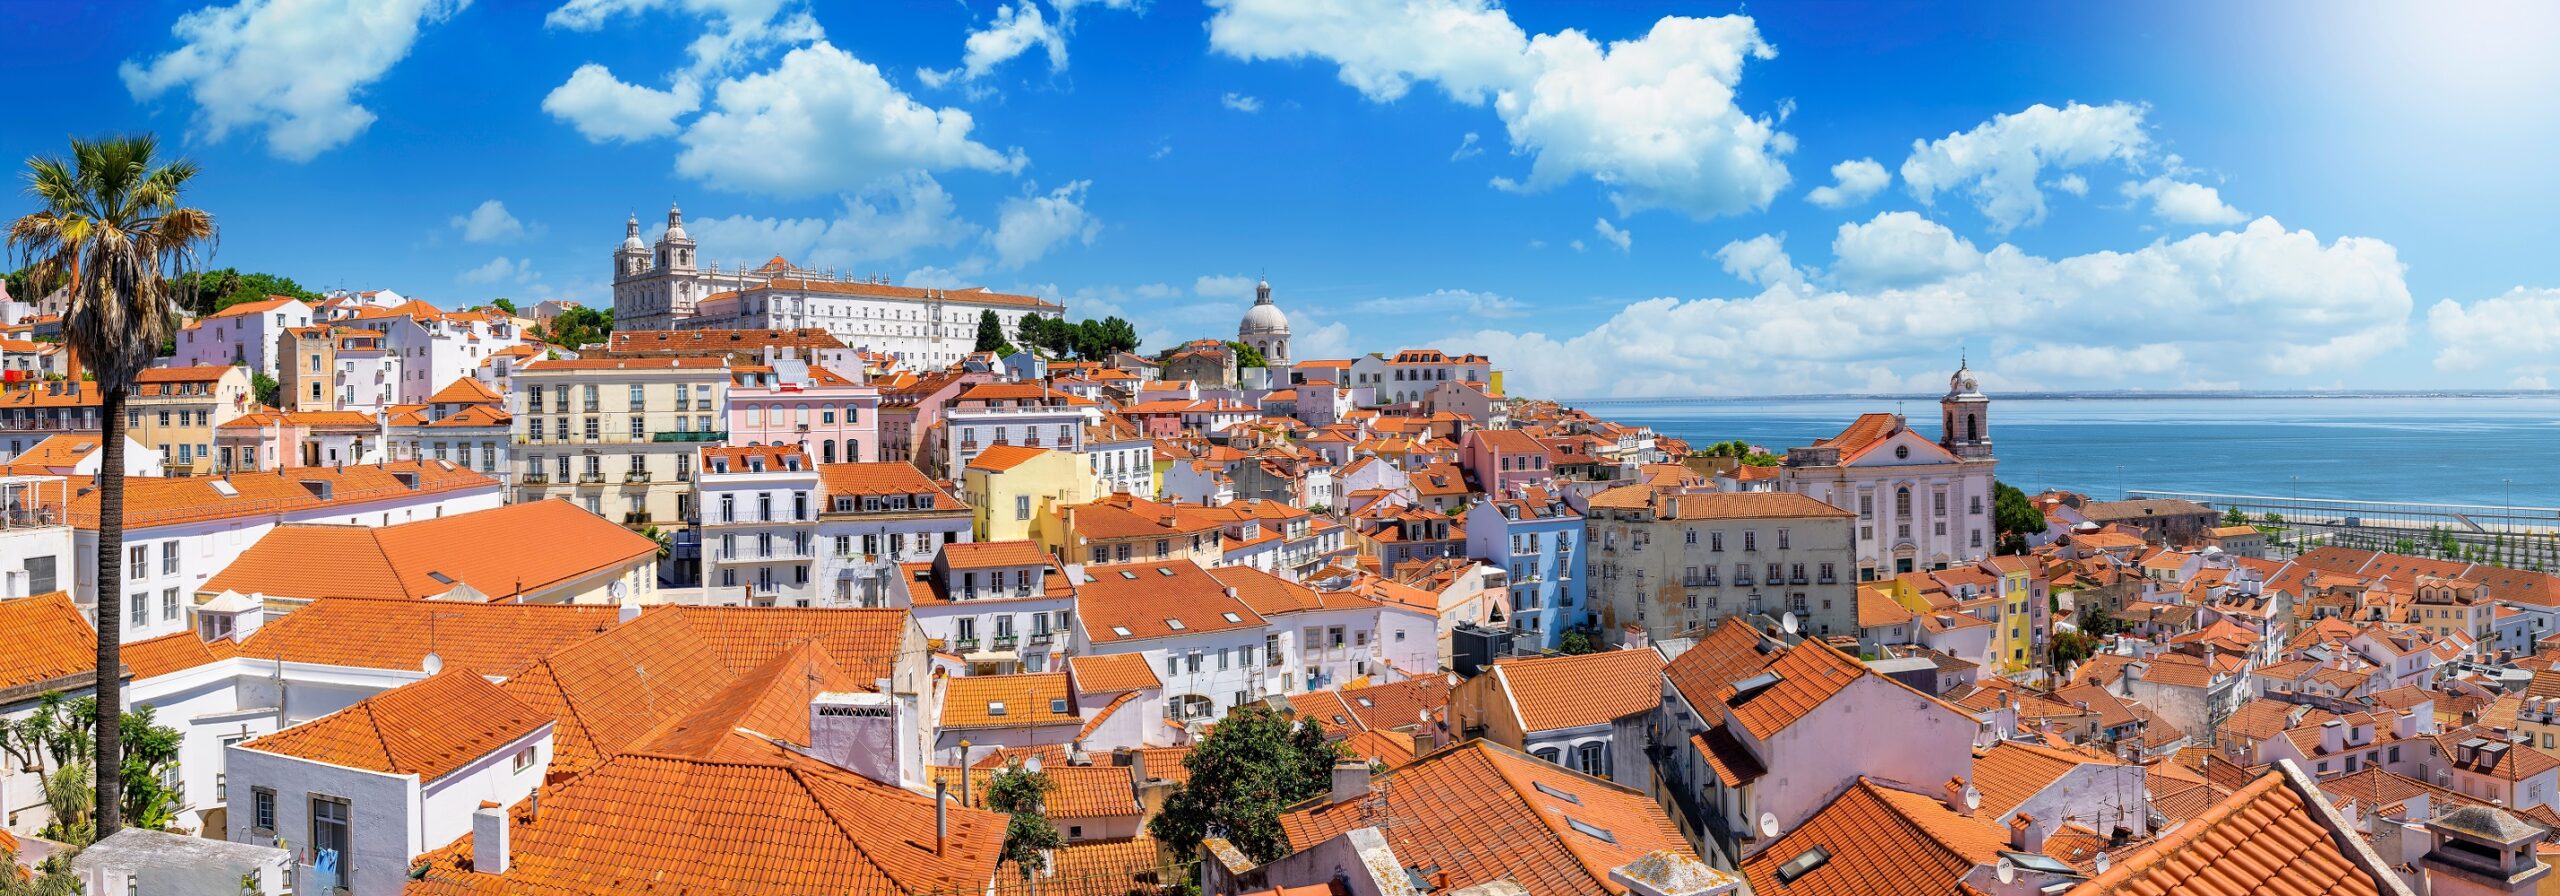 Euro weakness makes luxury EU properties more attractive to investors, especially in Portugal